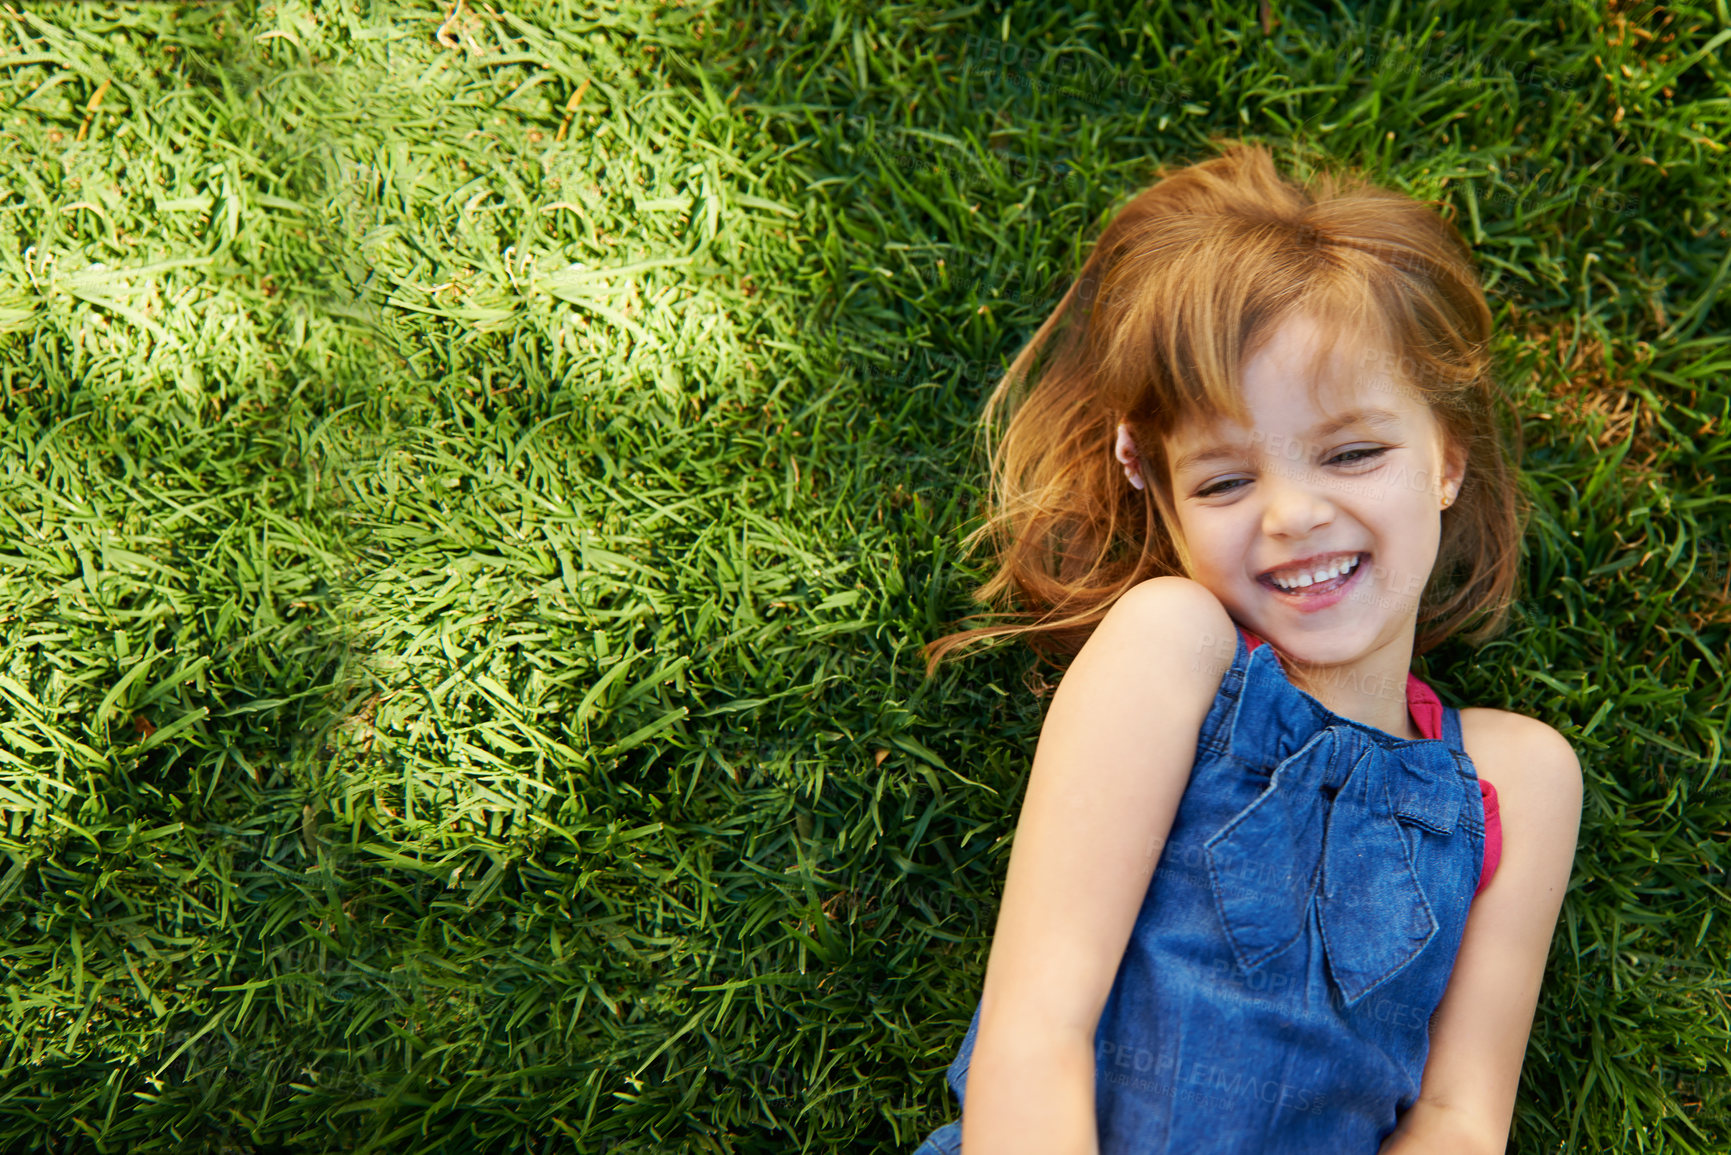 Shot of a cute little girl smiling while lying down on grass - stock photo ...